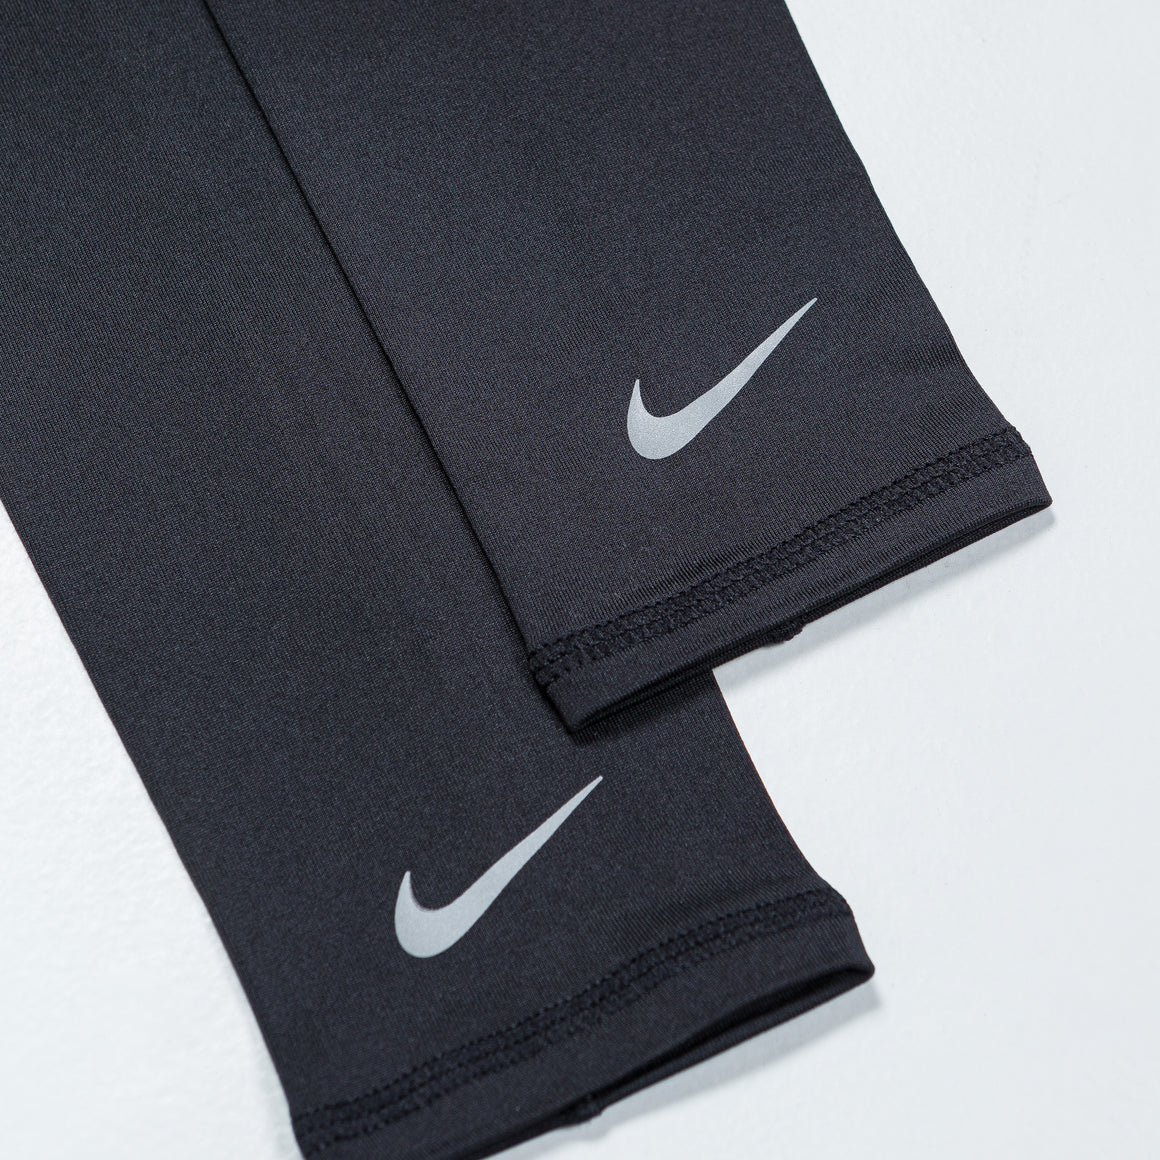 Nike - Lightweight Running Sleeves - Black - Up There Athletics